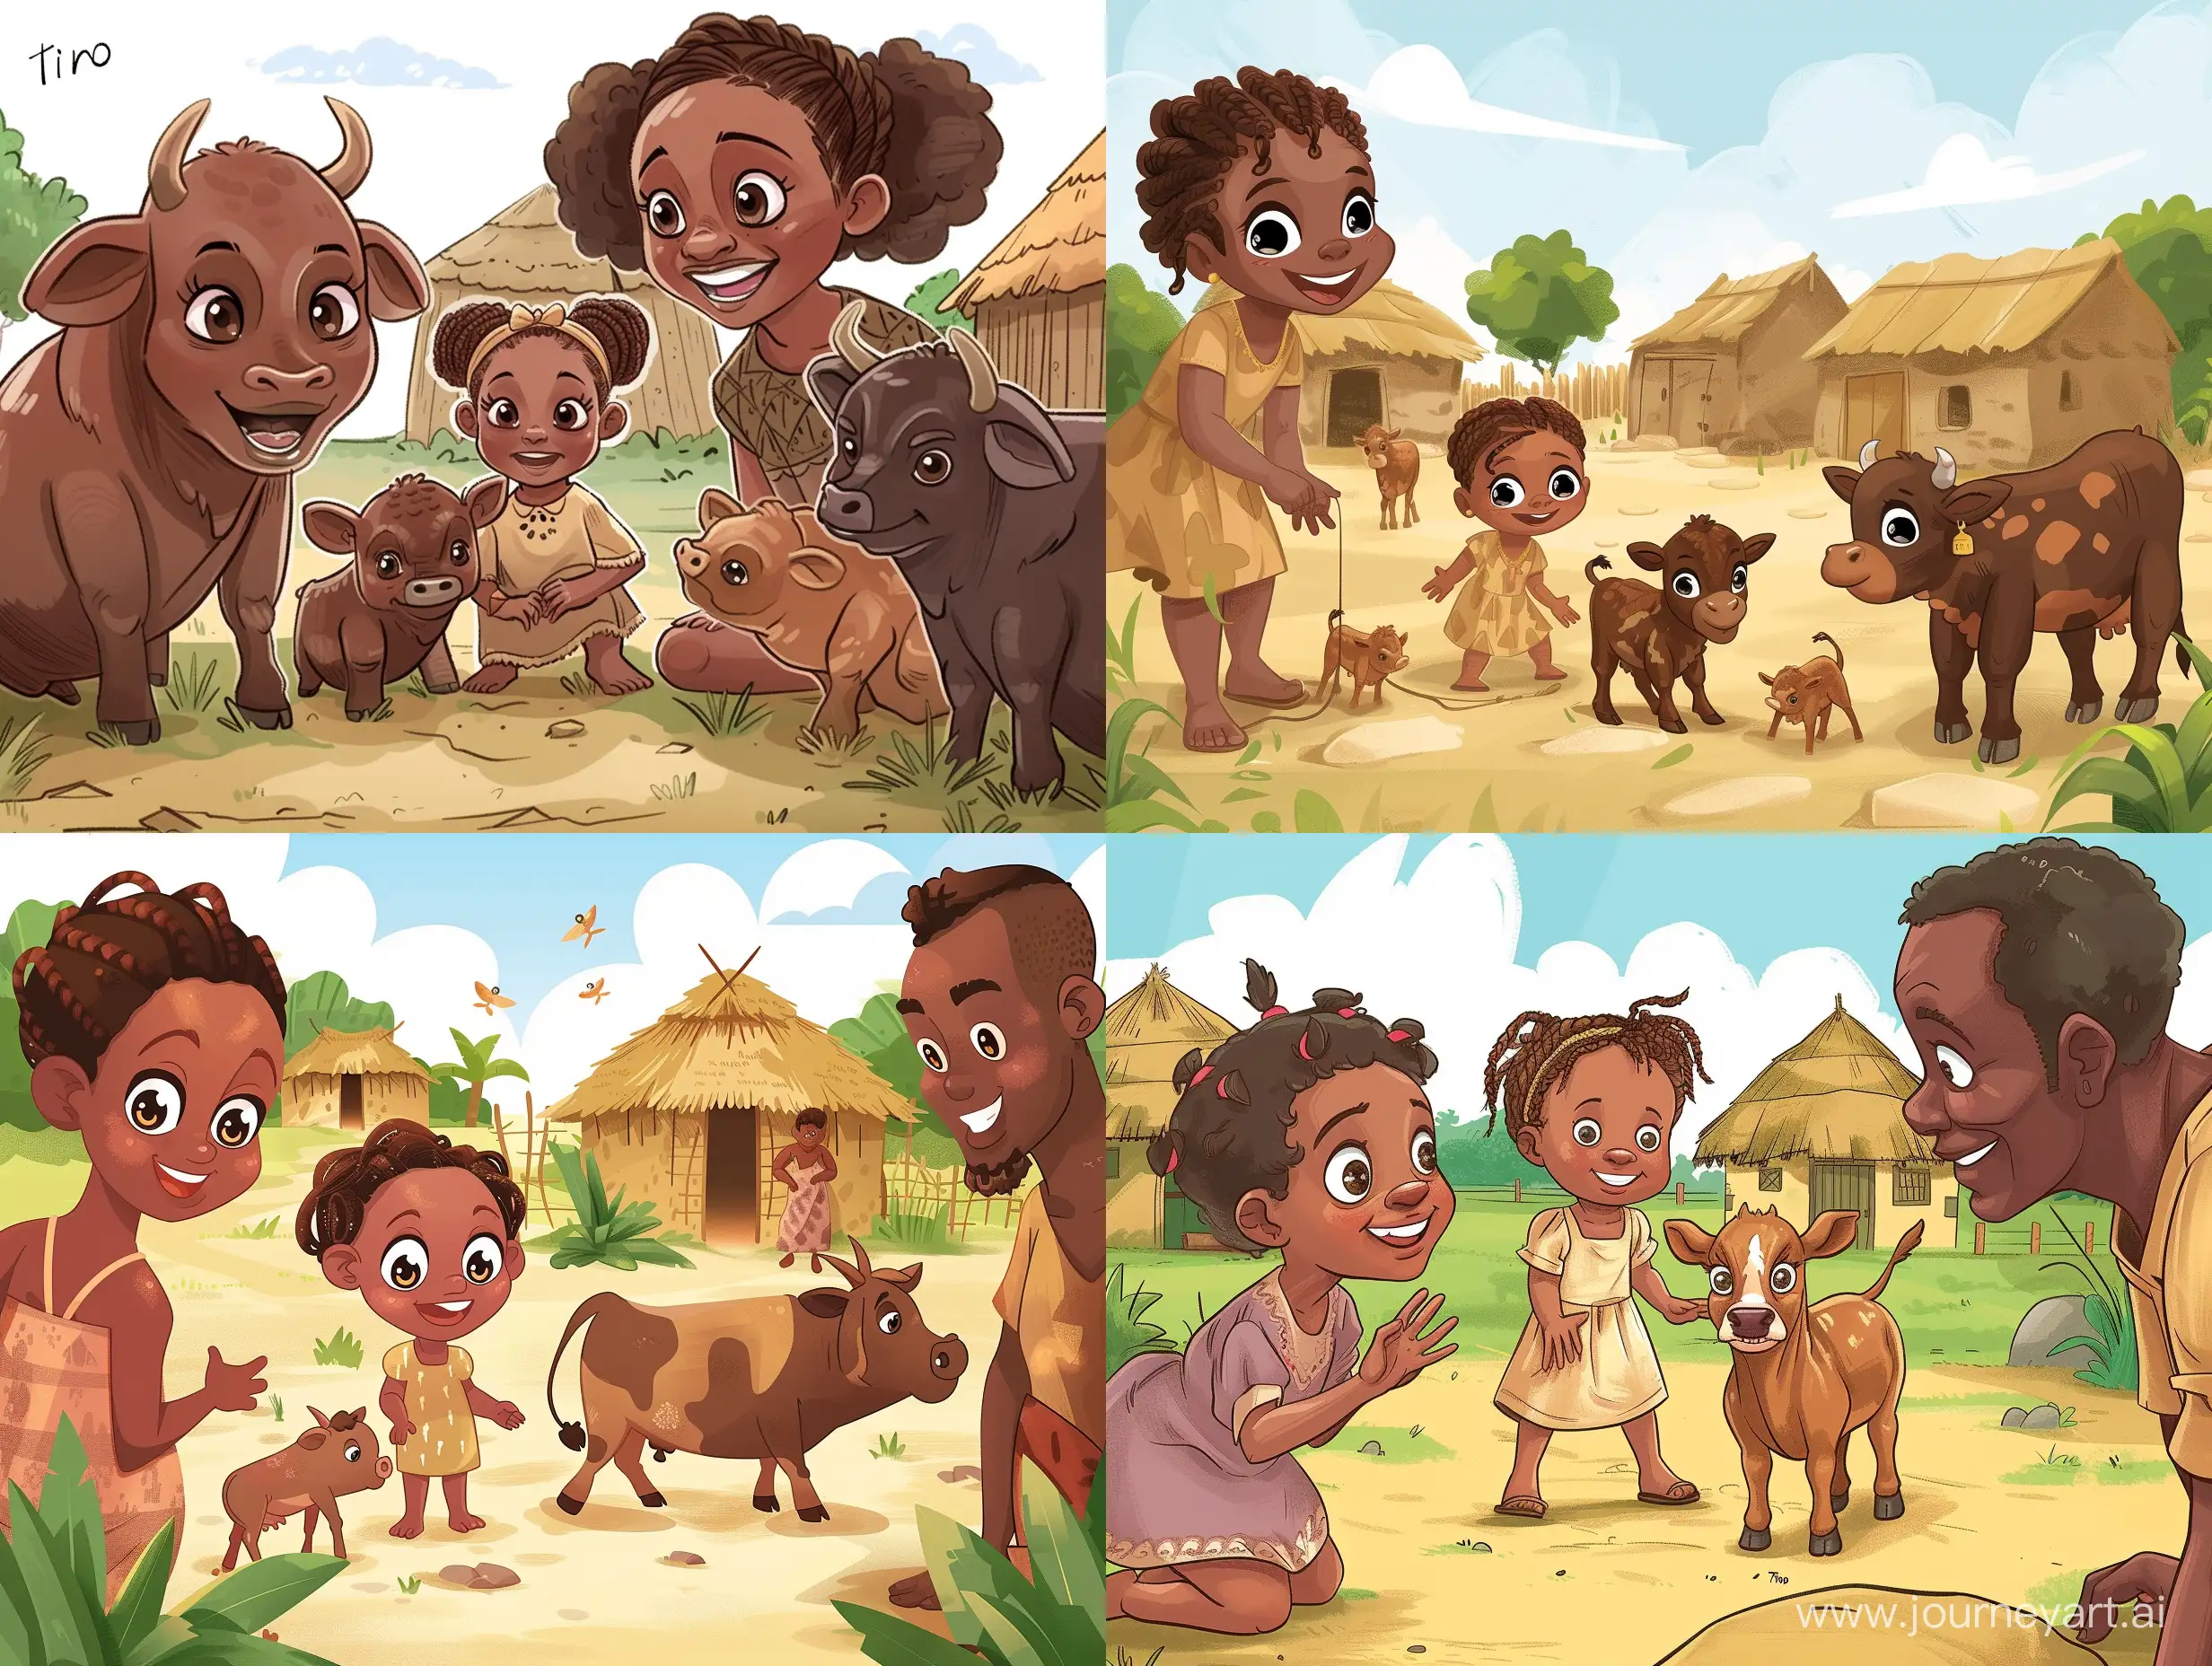 An illustration of tino an African 2 year old girl with expressive big eyes playing in the compound with her 2 cows which are kitufu and Bambi - the cows are brown in colour. The surrounding have 2 huts and Tino's mother Tekat beautiful woman with braids and a village dress and father Tepo handsome African man whose mixed race with expressive big eyes. All should be express as cartoon aime characters